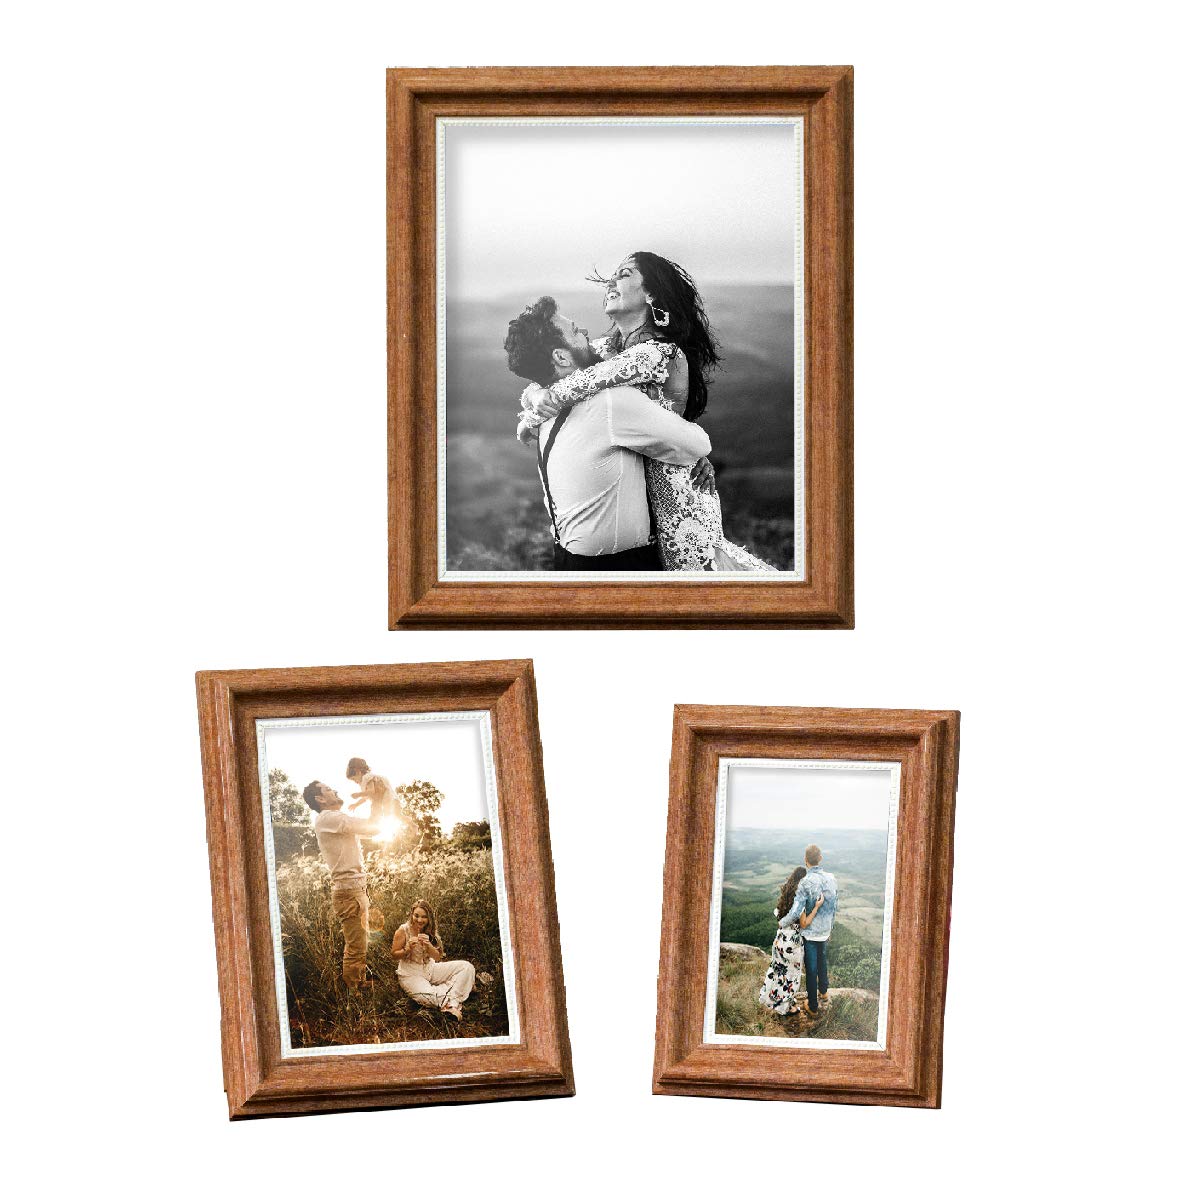 How To Decorate Picture Frames